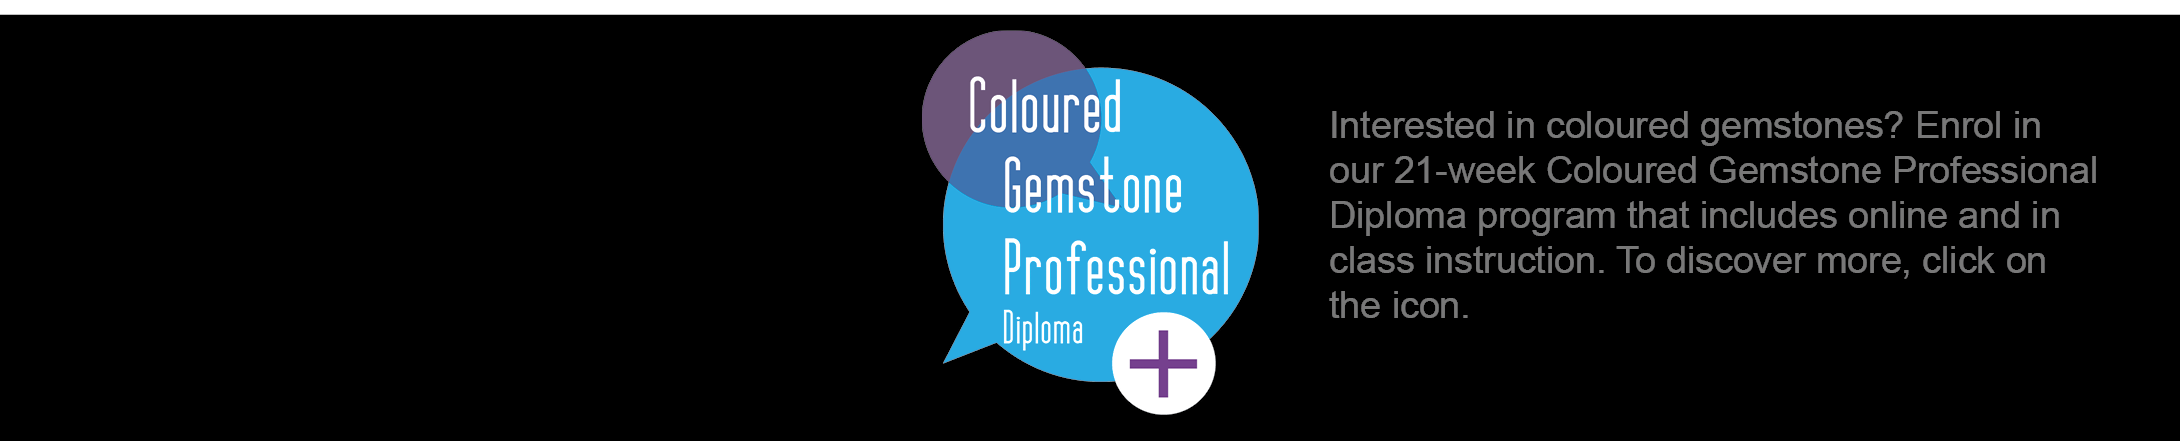 Coloured Gemstone Professional Learn More